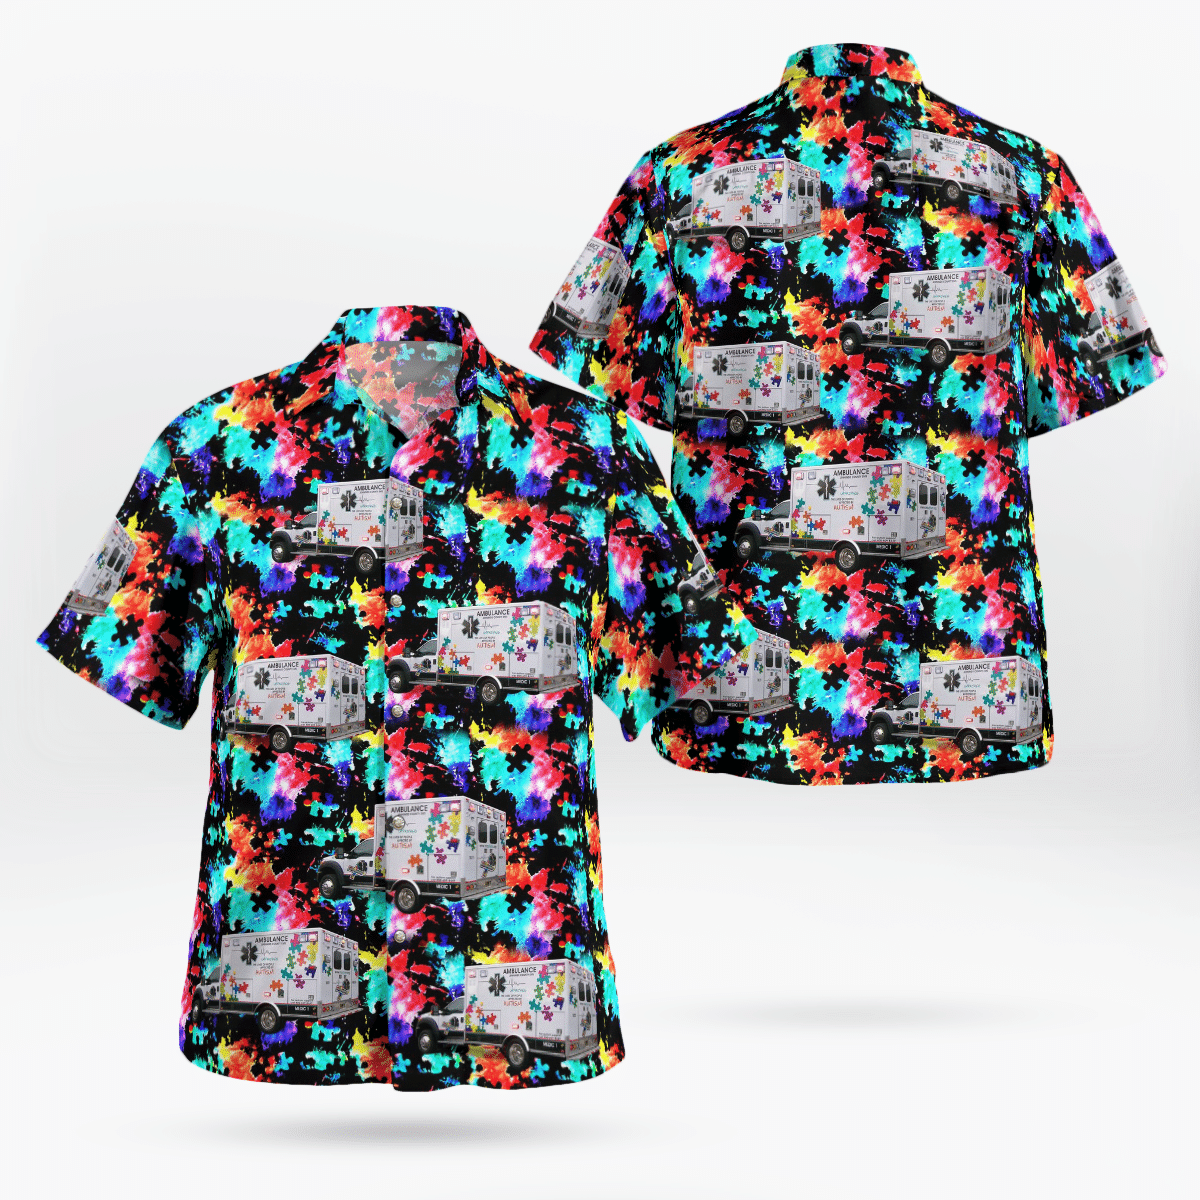 If you are in need of a new summertime look, pick up this Hawaiian shirt 13